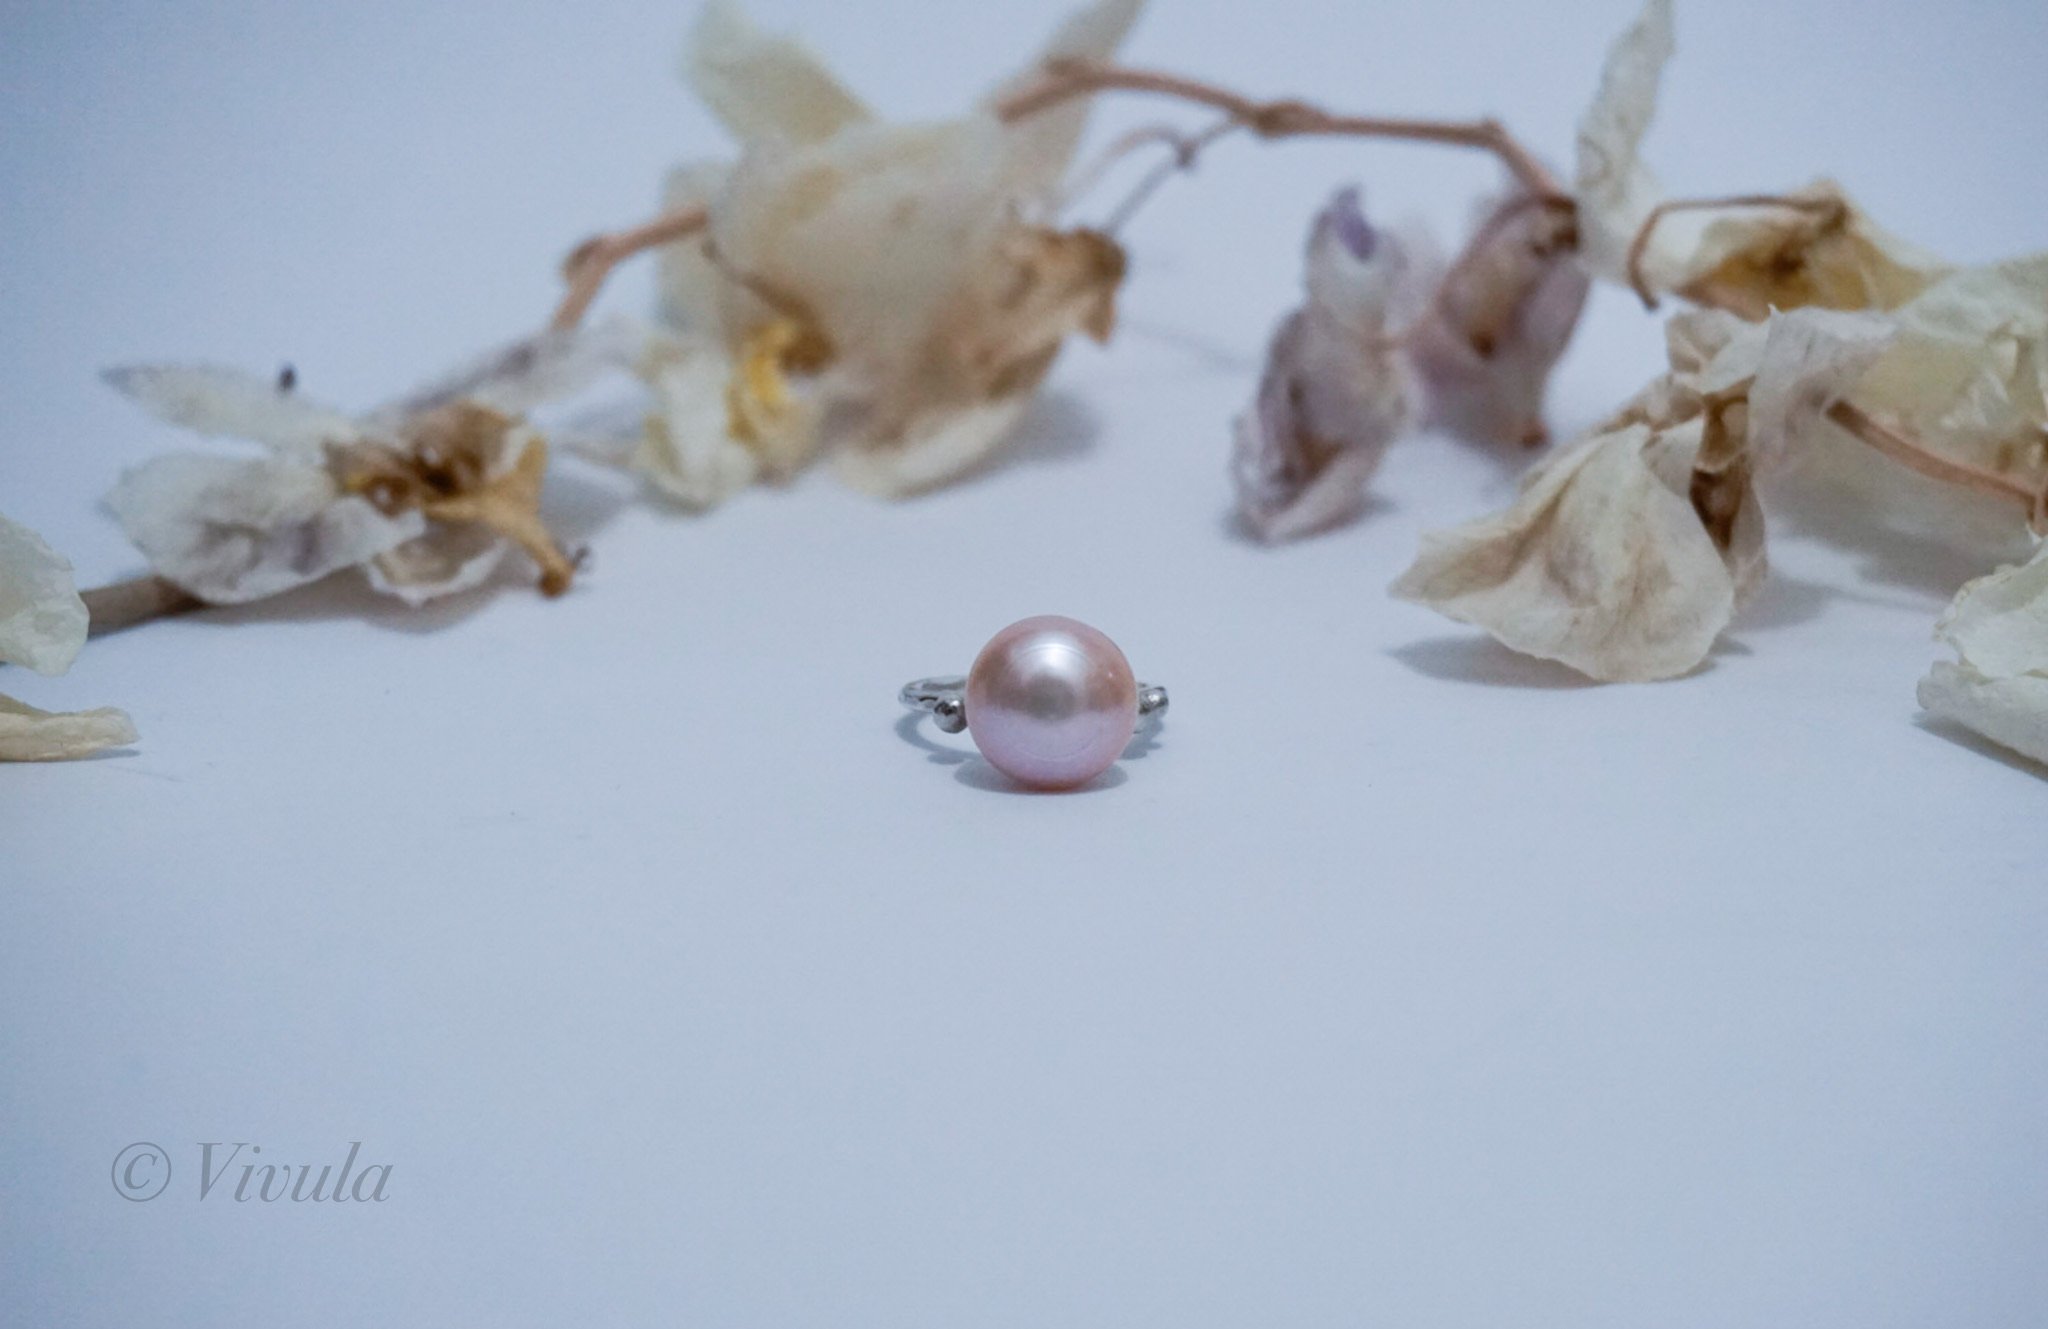 Large Pearl Ring